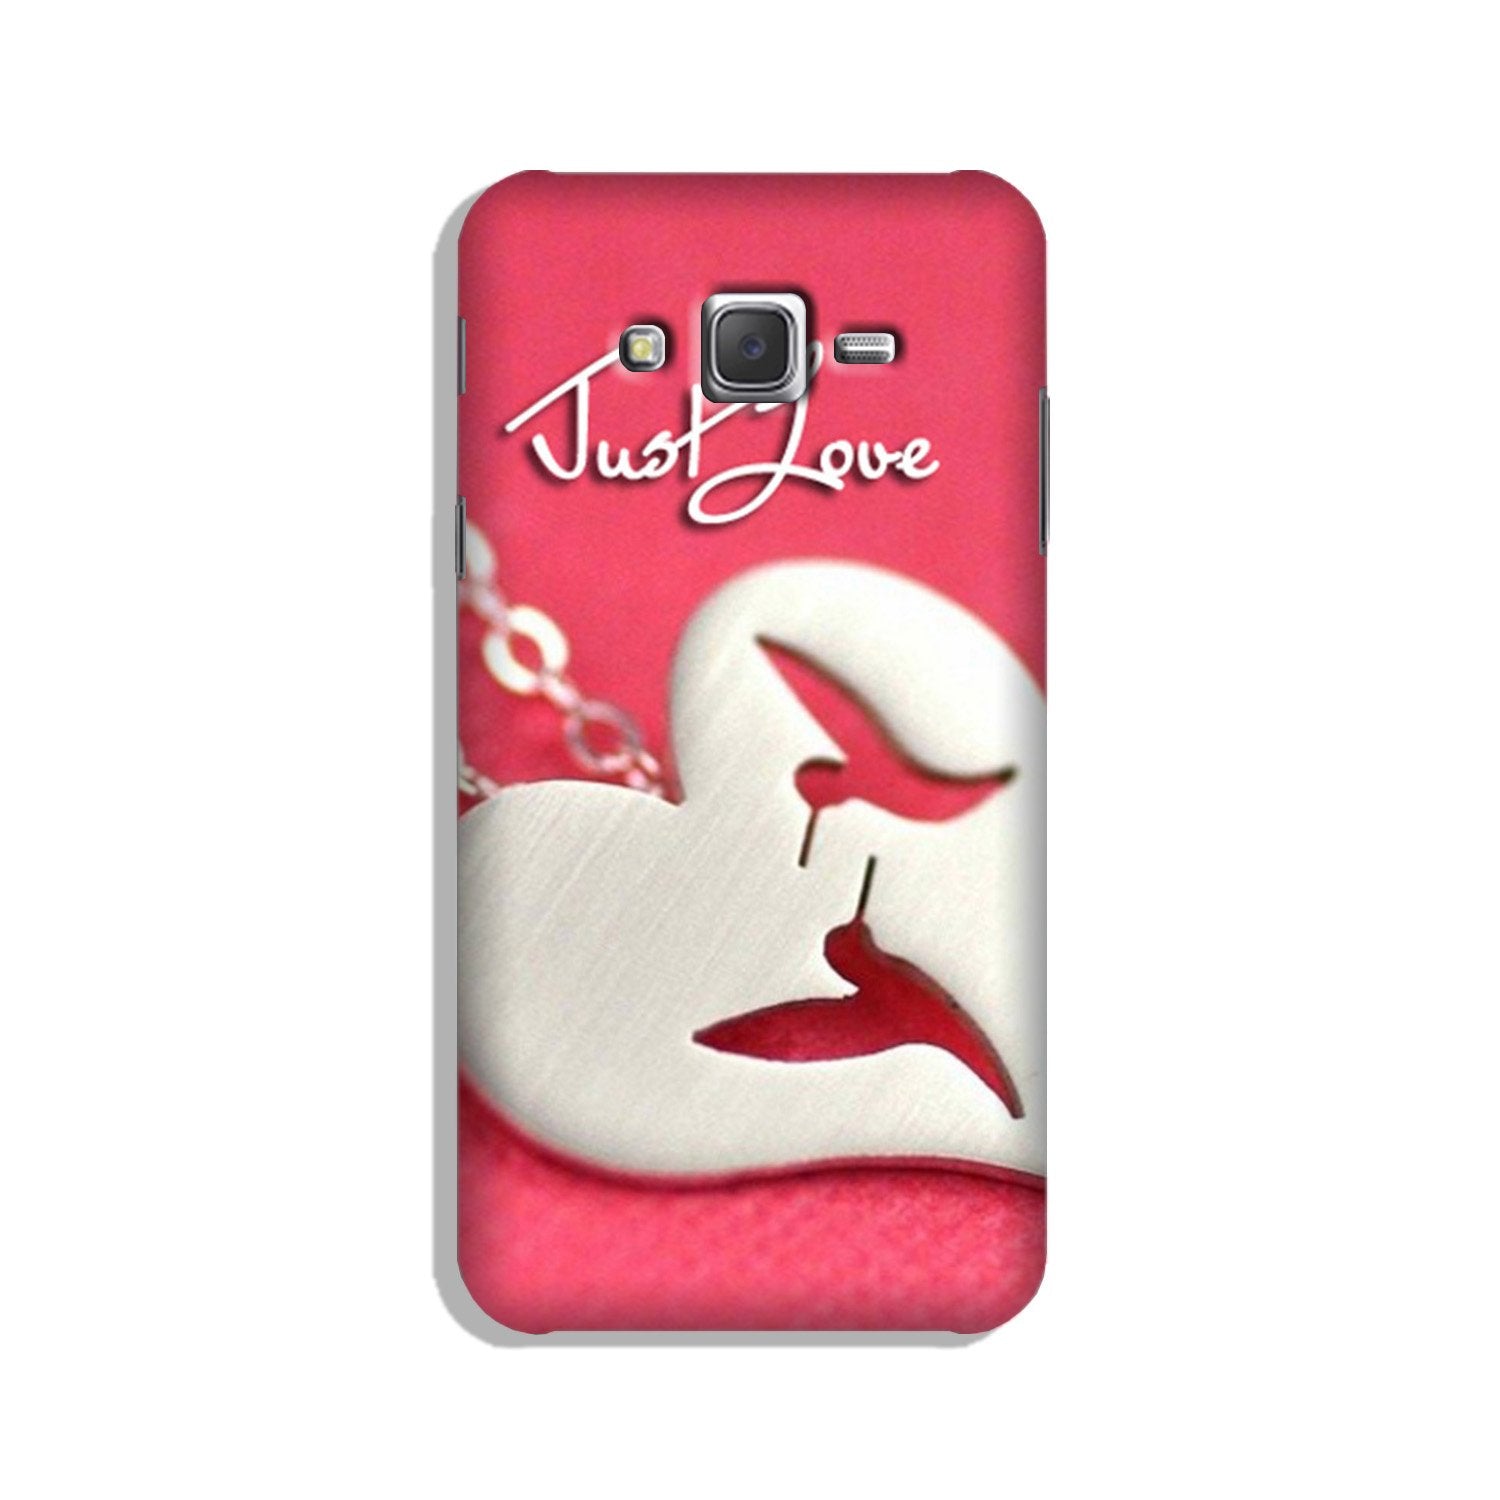 Just love Case for Galaxy J3 (2015)